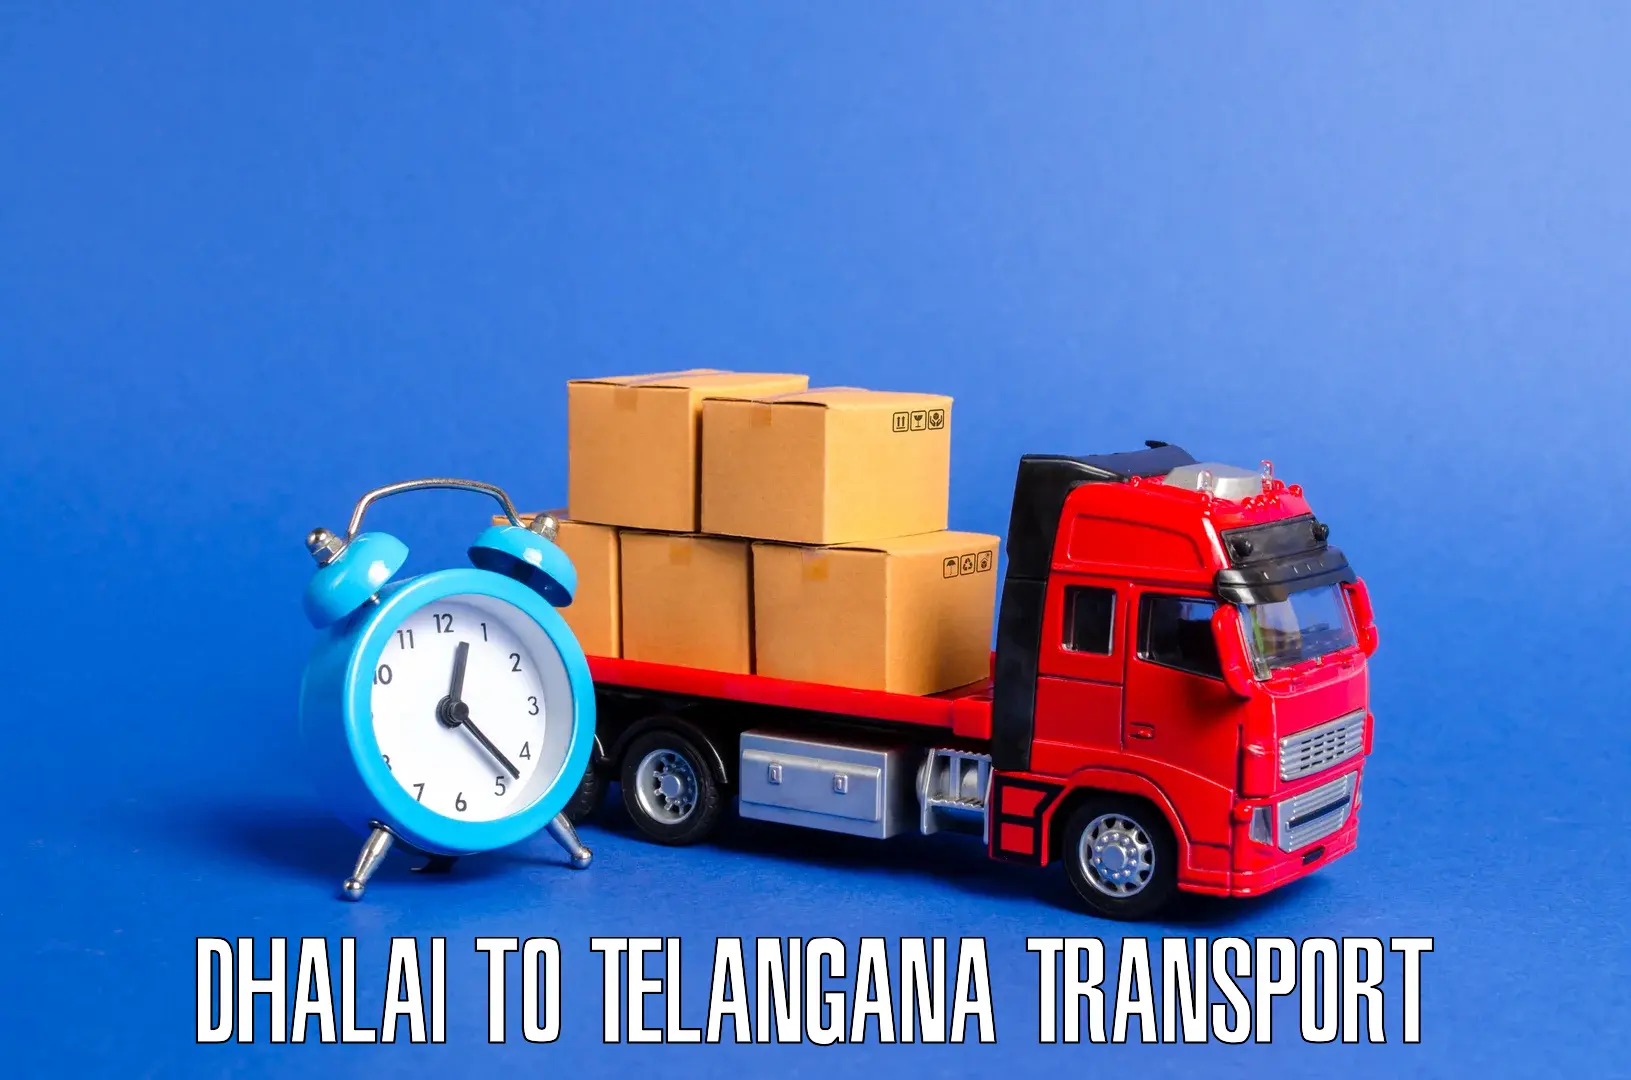 Container transport service in Dhalai to Nereducharla